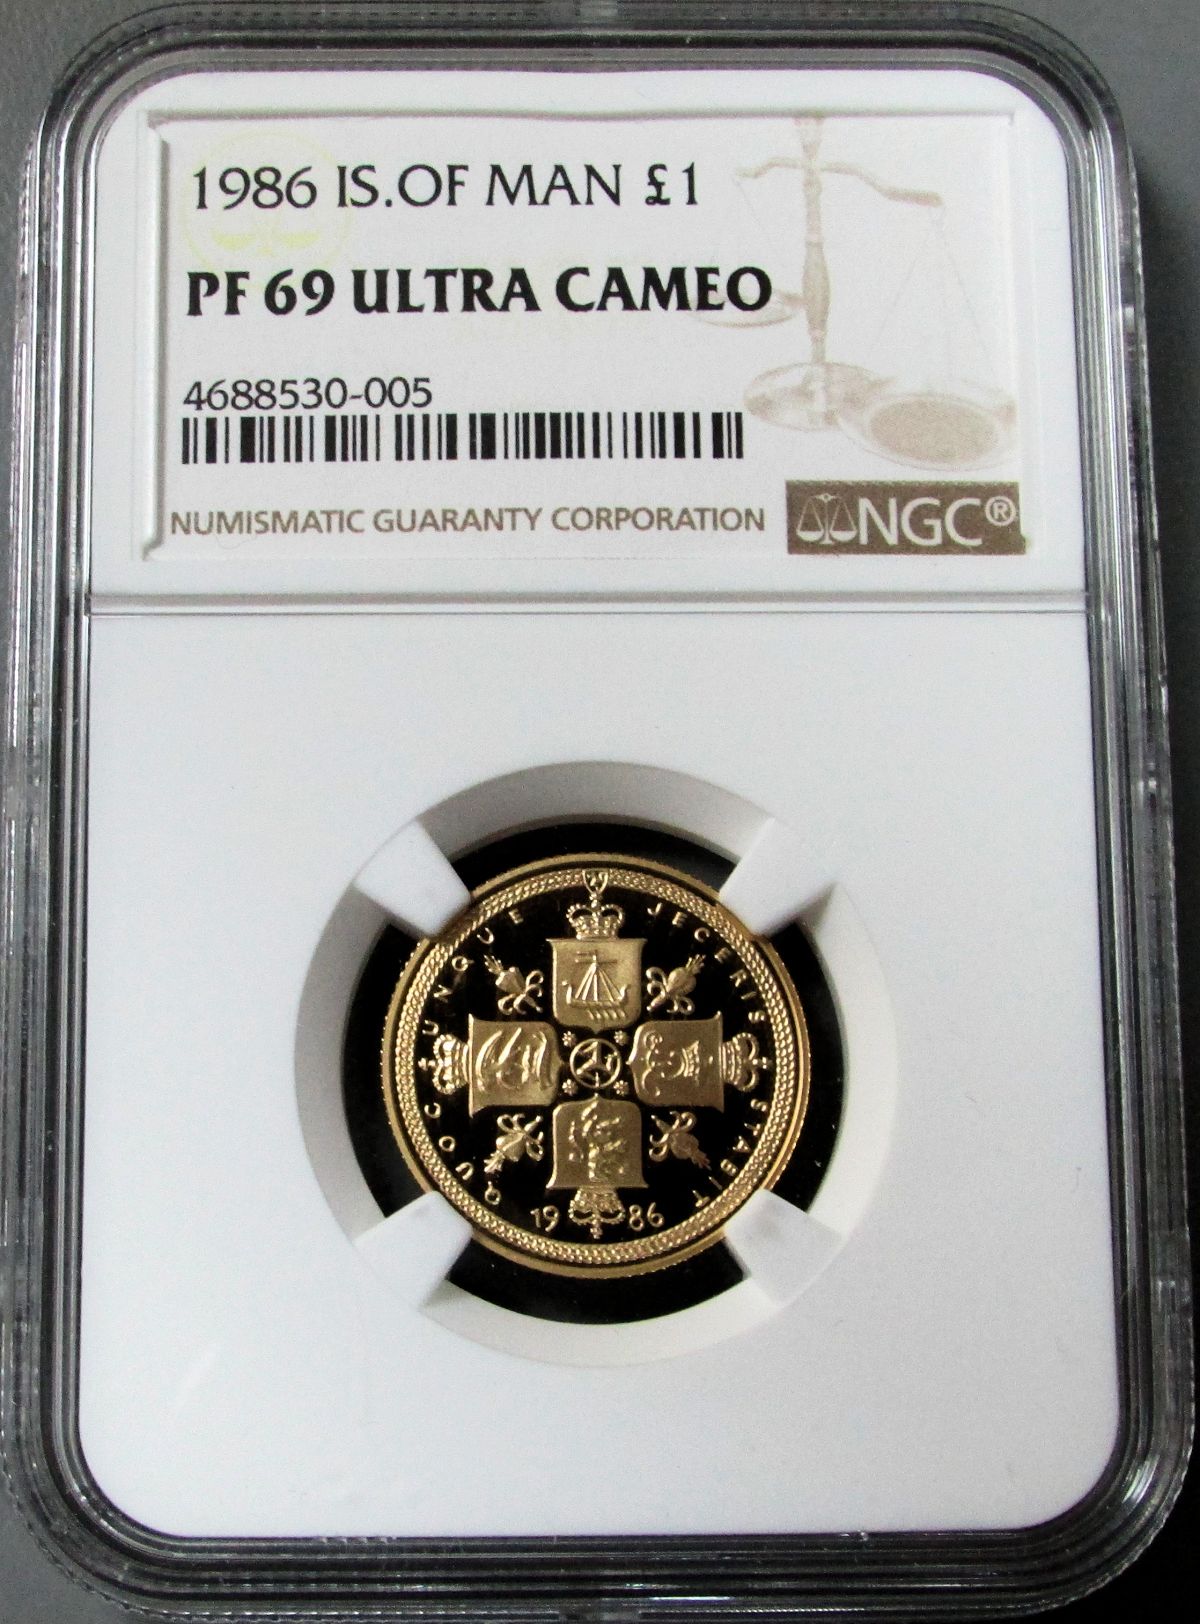 1986 GOLD ISLE OF MAN 1 POUND SOVEREIGN  COIN NGC PROOF 69 ULTRA CAMEO "ONLY 12 MINTED" 